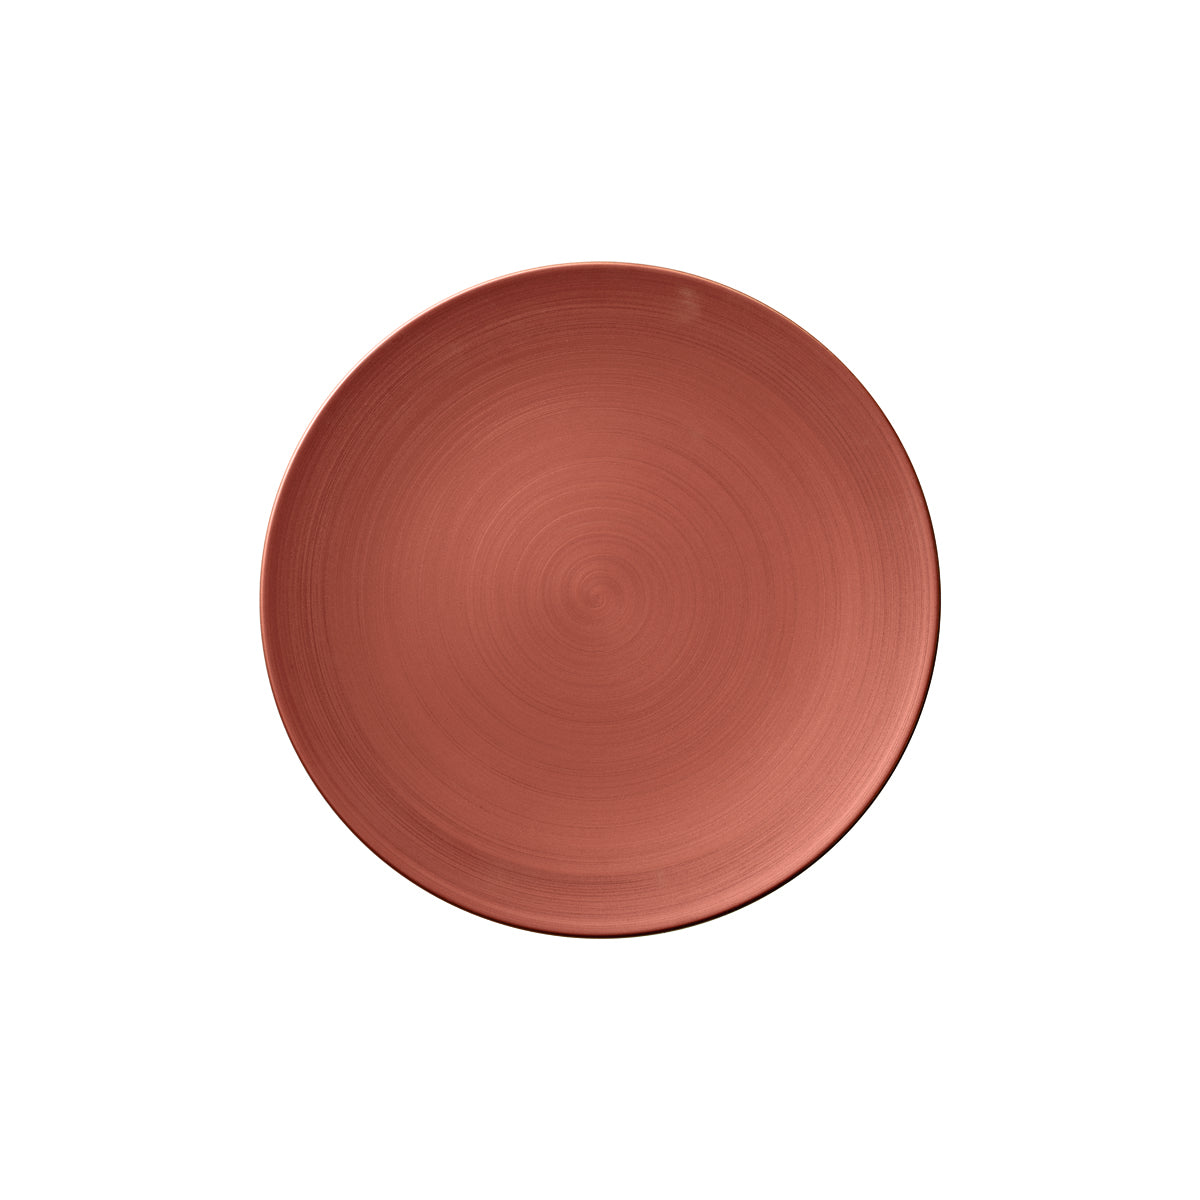 VB16-4070-2595 Villeroy And Boch Villeroy And Boch Copper Glow Coupe Plate 320mm Tomkin Australia Hospitality Supplies